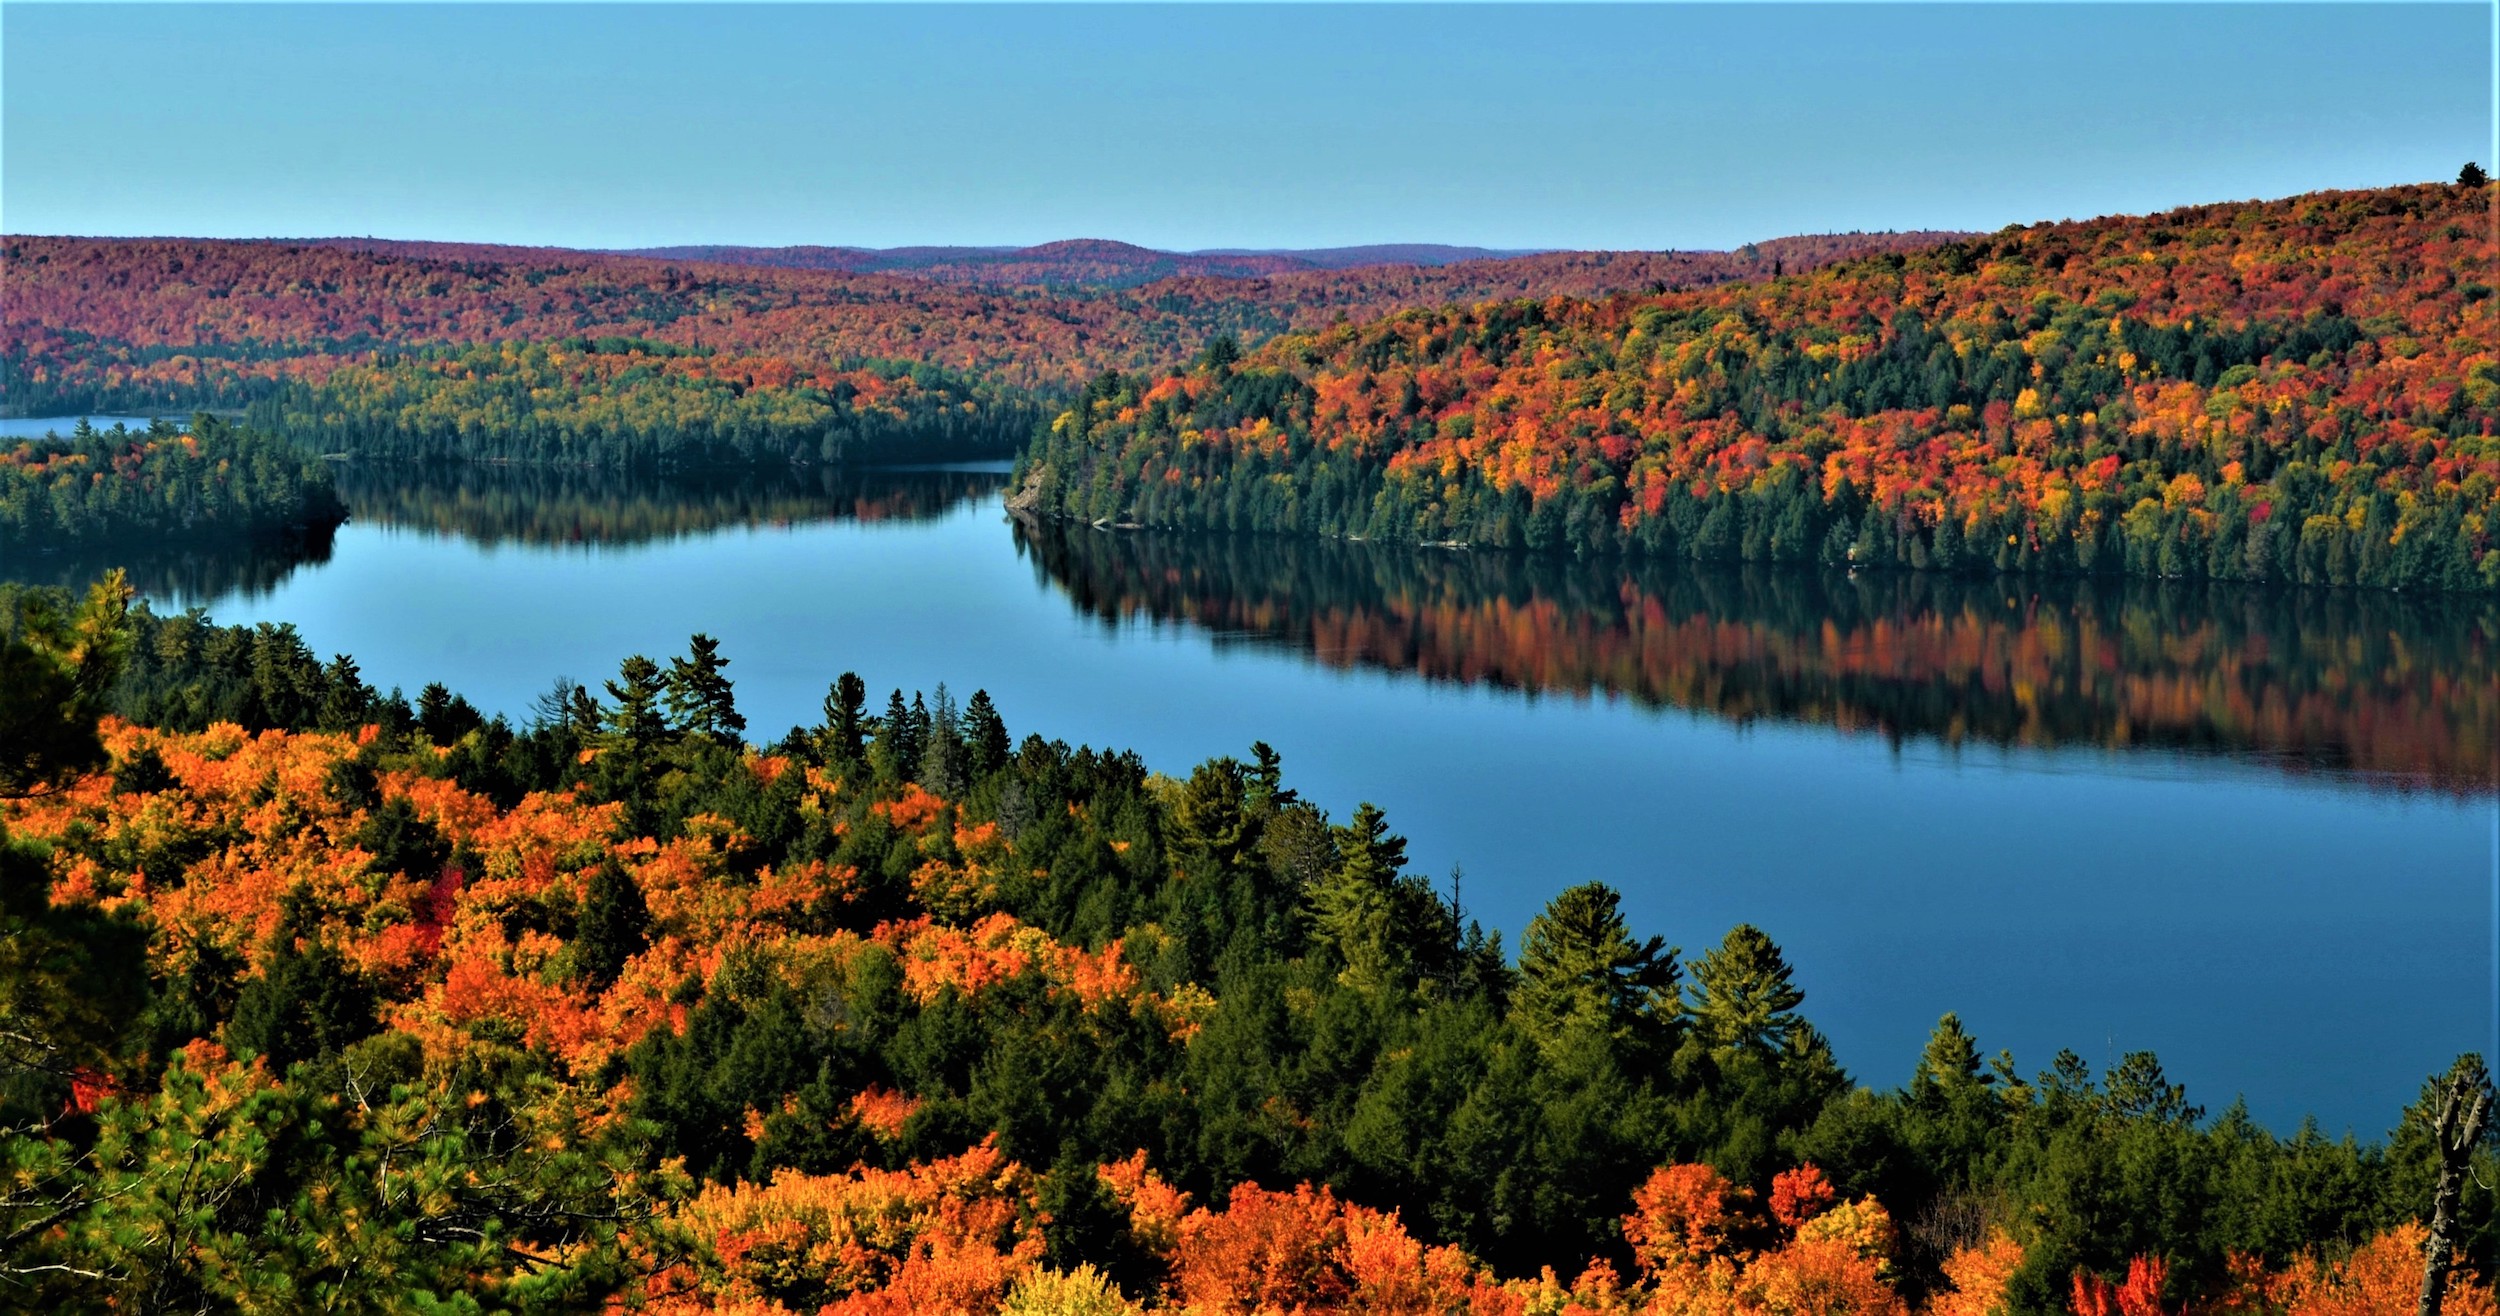 The beautiful colors of Autumn around Rock Lake in Algonquin Provincial Park, Ontario, Canada.